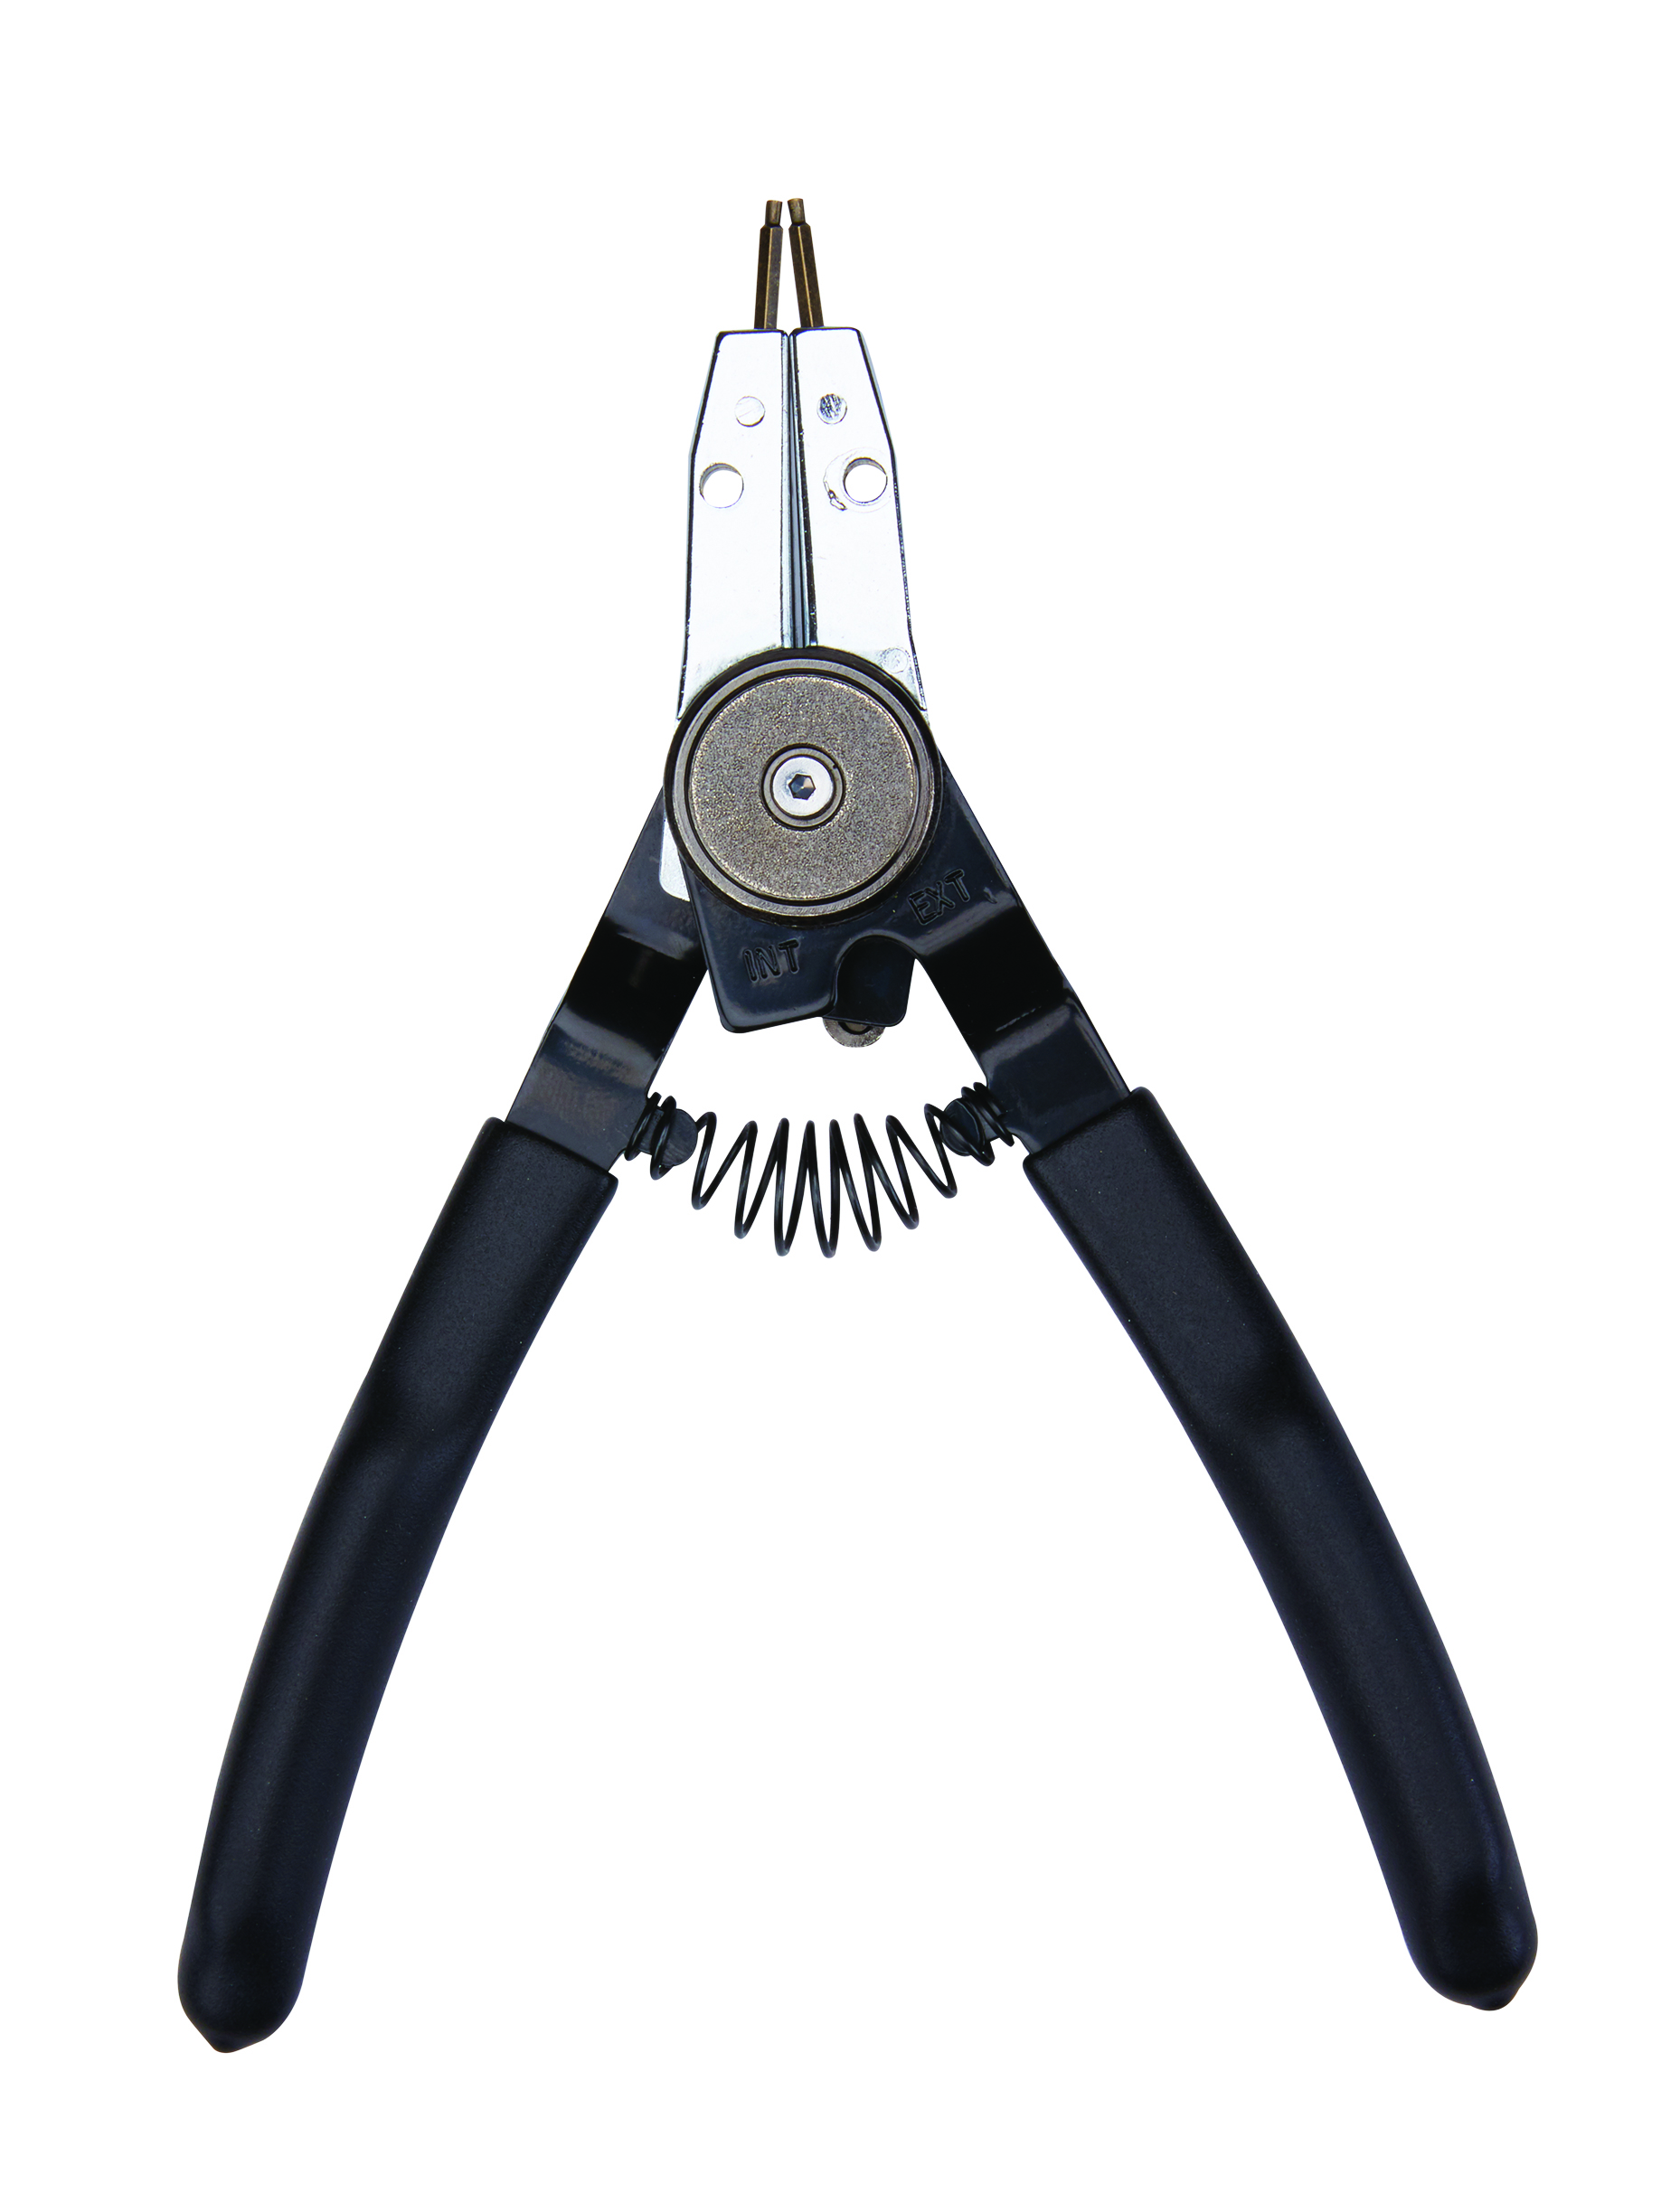 QUINN Snap Ring Pliers with Reversible Action - Item 63938